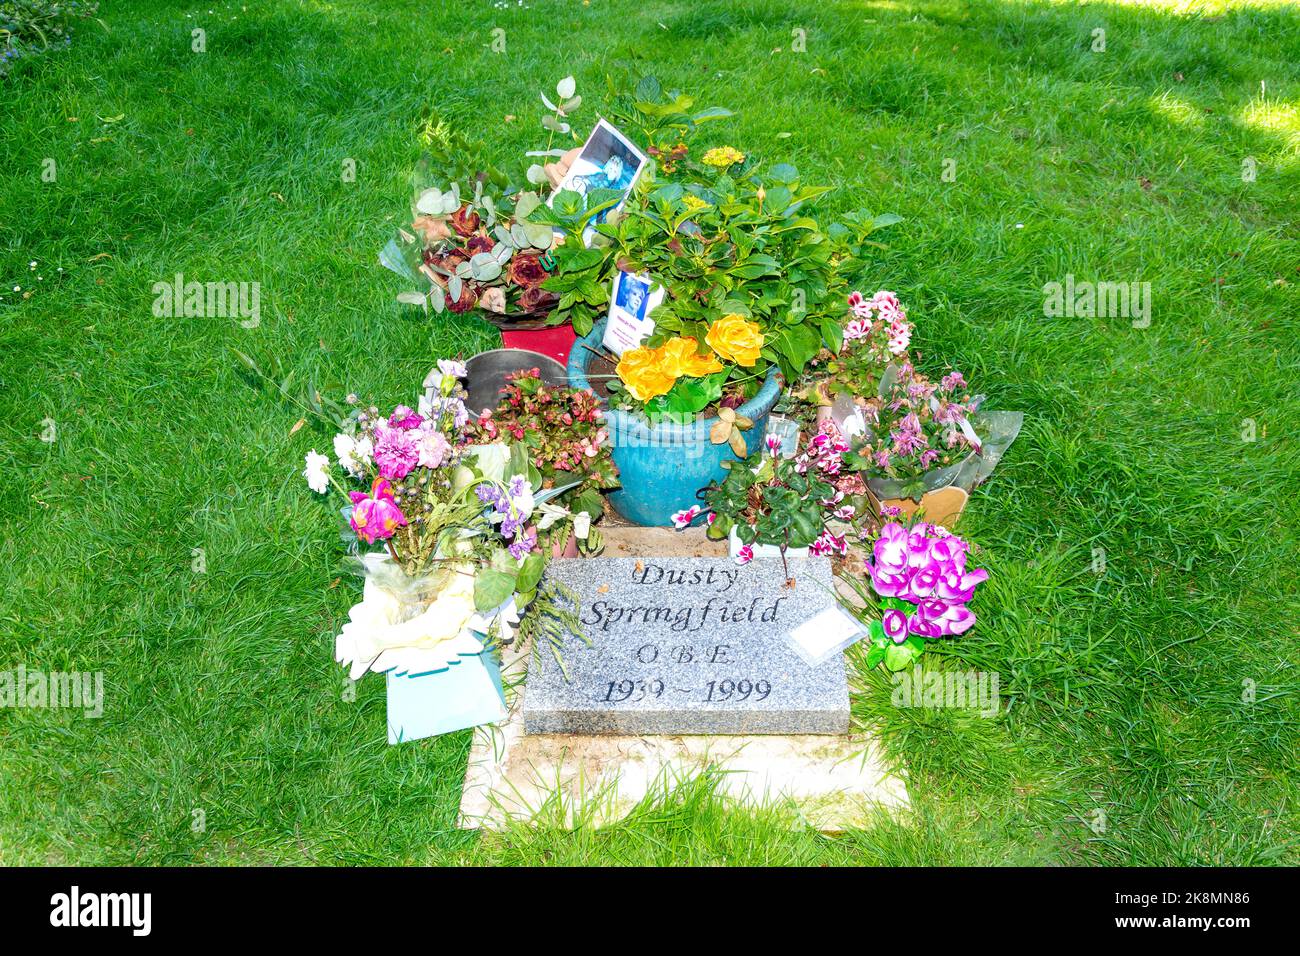 Singer Dusty Sprinfield's grave in churchyard of St Mary's Church, Church Avenue, Henley-on-Thames, Oxfordshire, England, United Kingdom Stock Photo